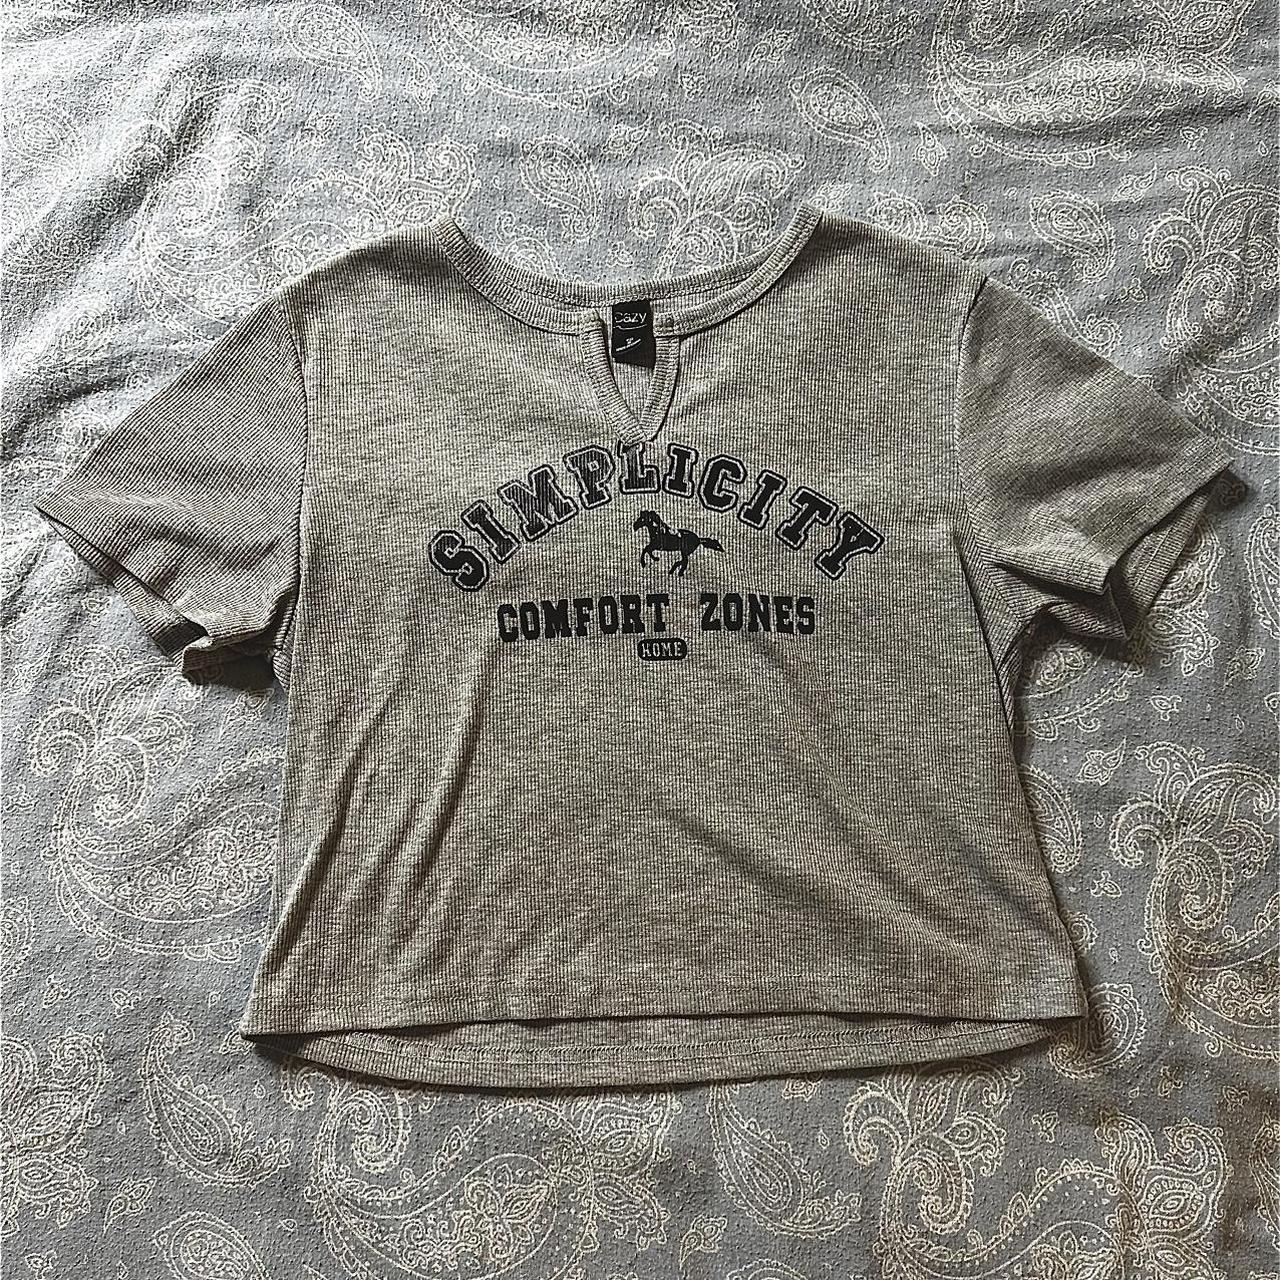 X-Large Grey “Simplicity Comfort Zones Home” Cropped... - Depop